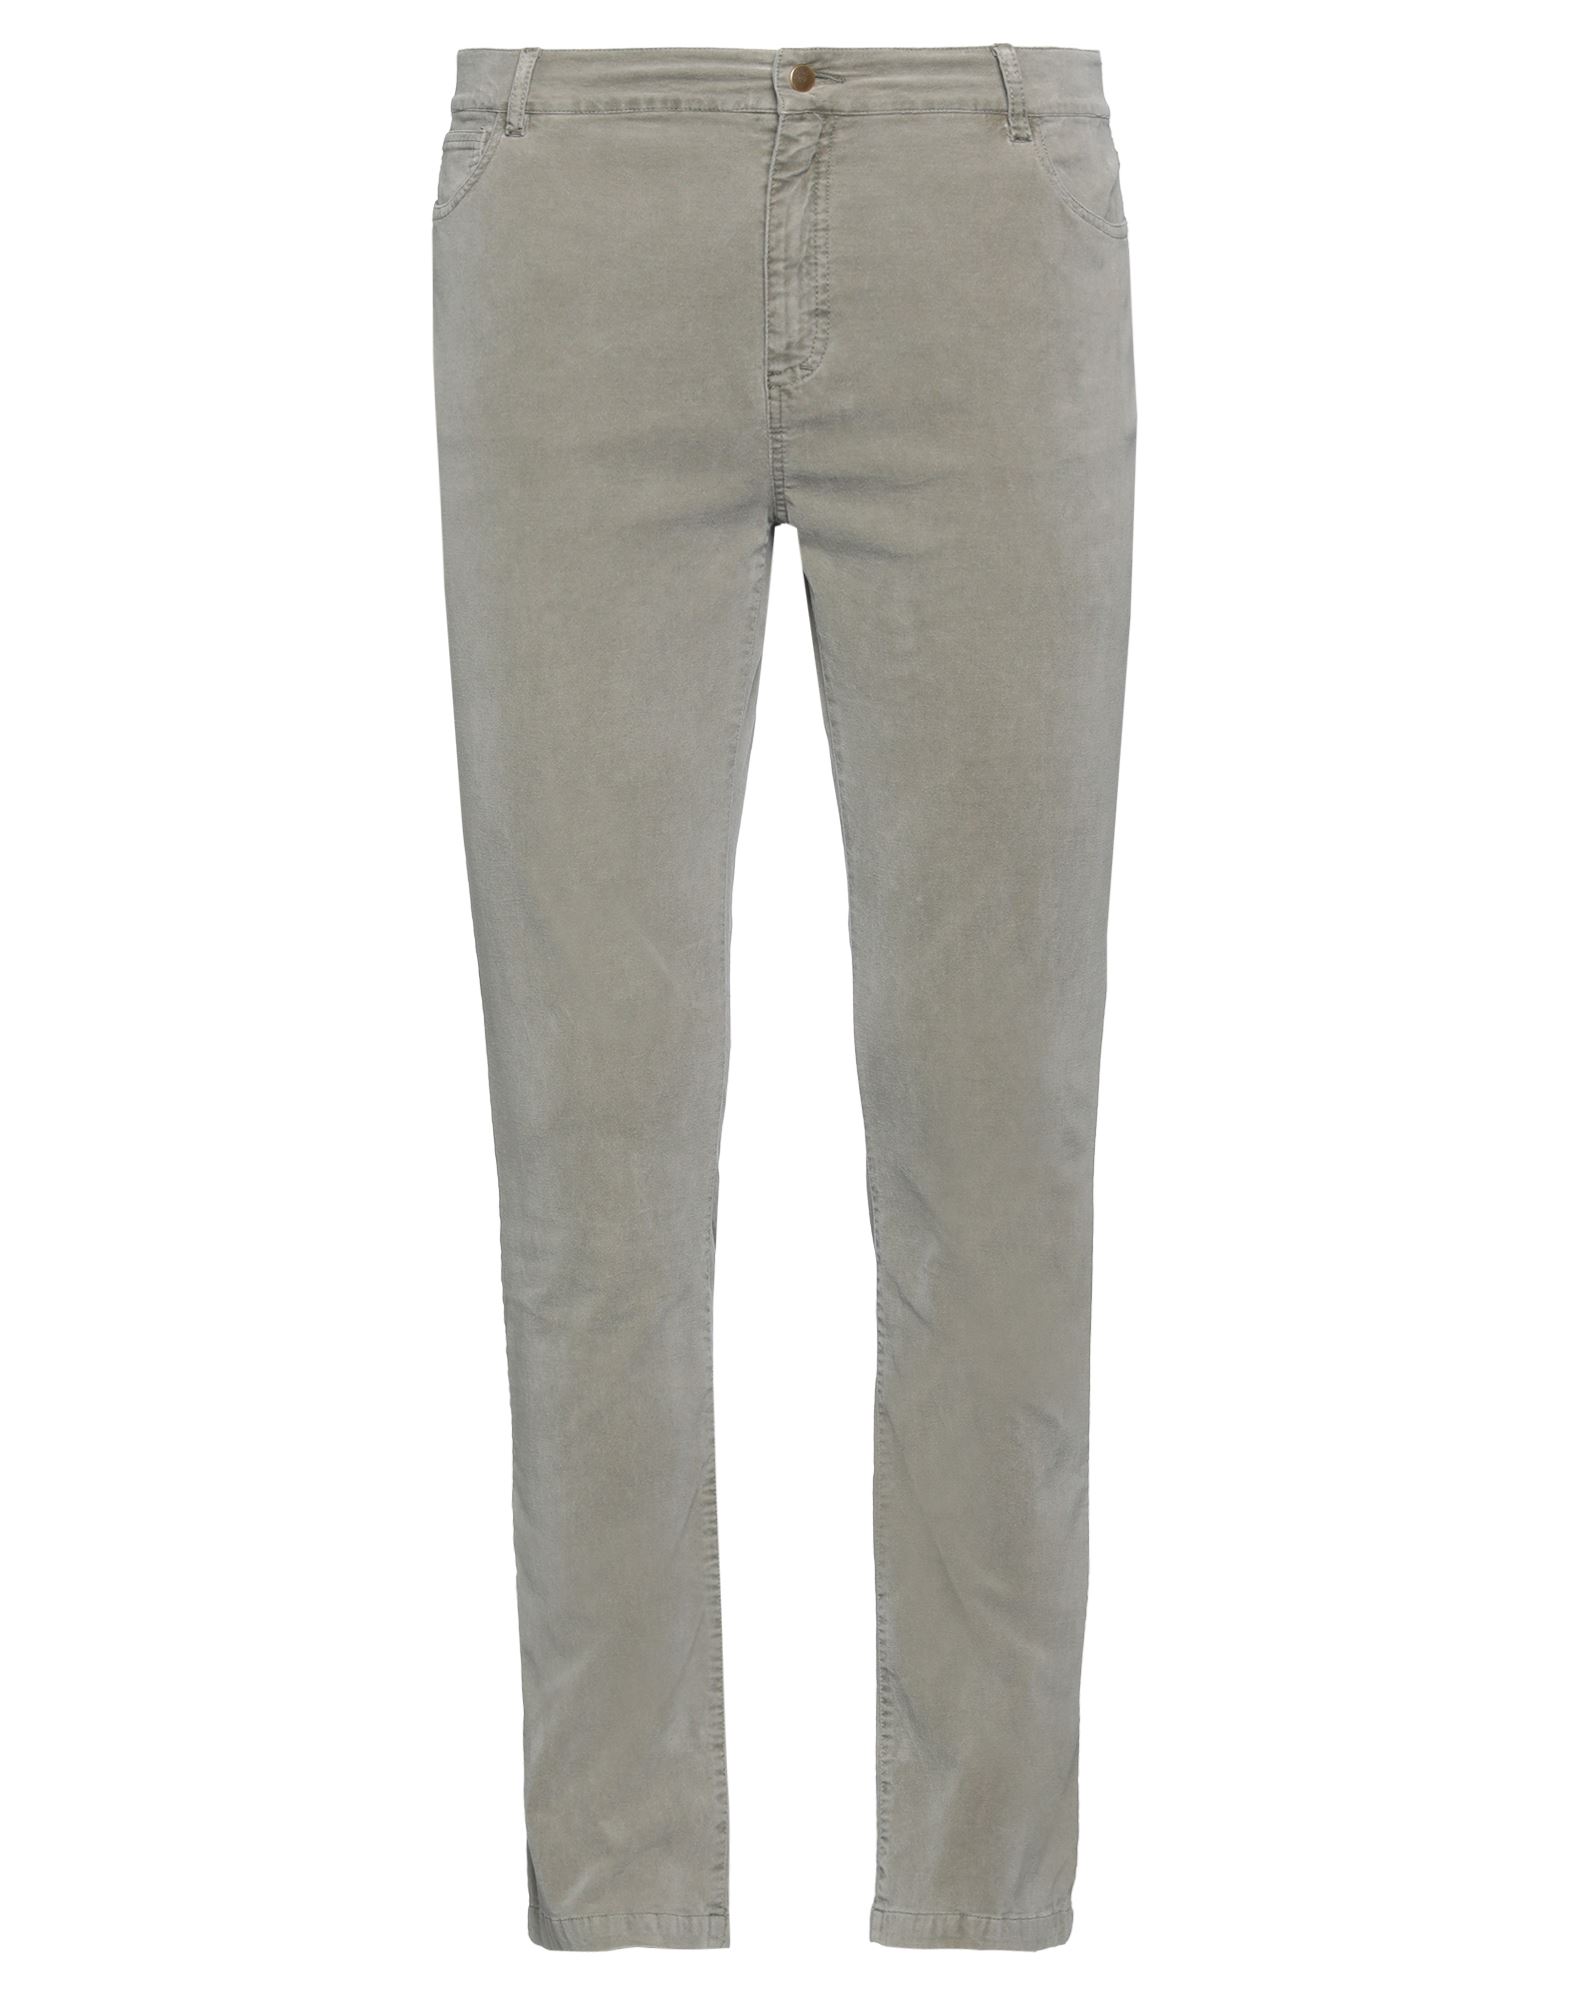 Ffc Pants In Sage Green